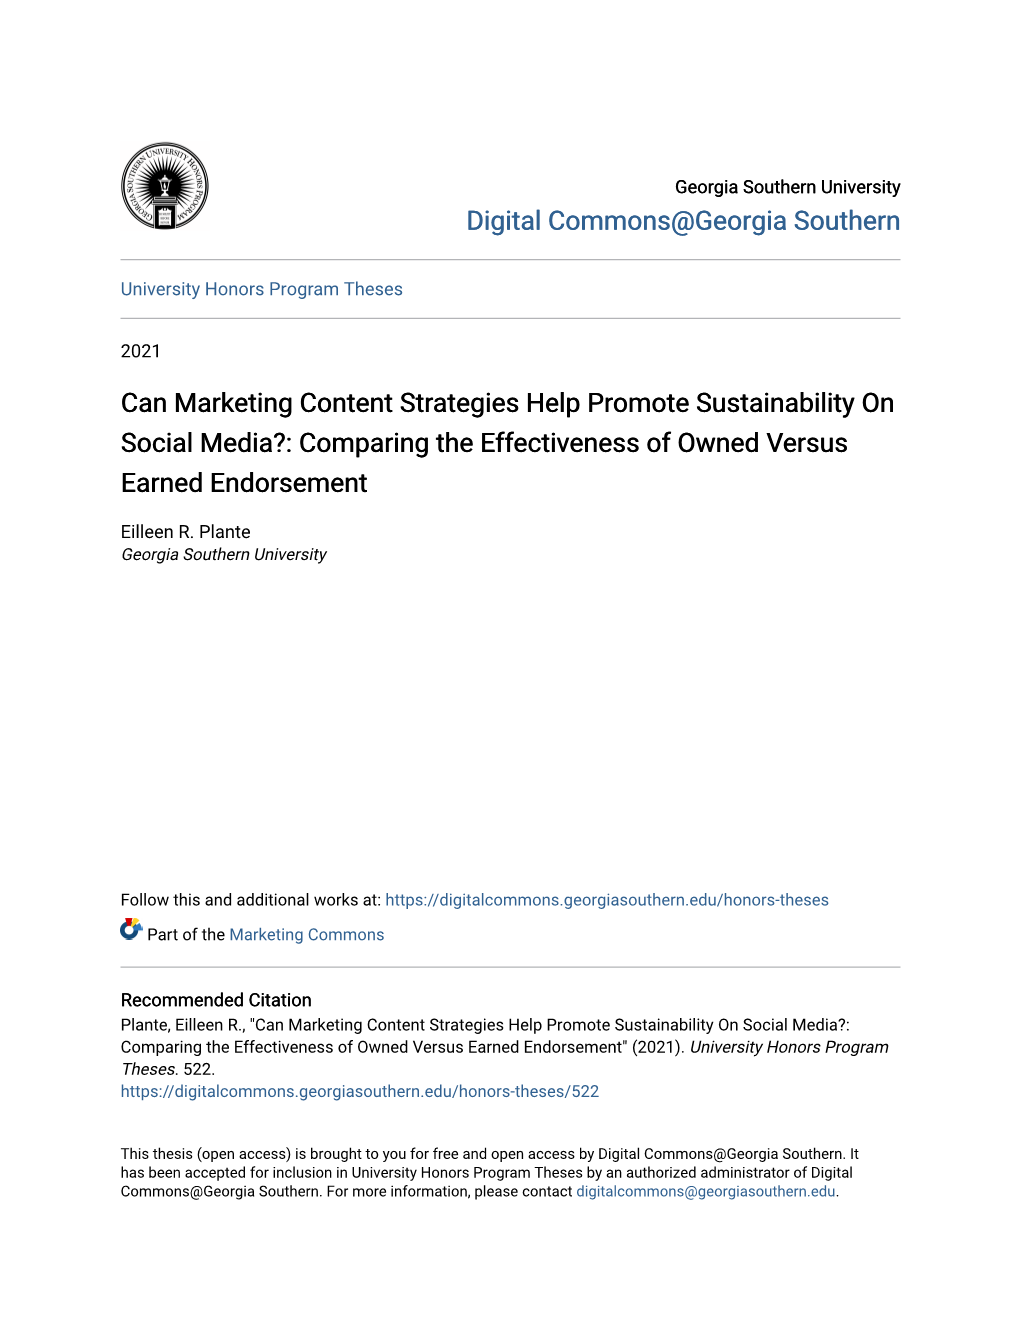 Can Marketing Content Strategies Help Promote Sustainability on Social Media?: Comparing the Effectiveness of Owned Versus Earned Endorsement